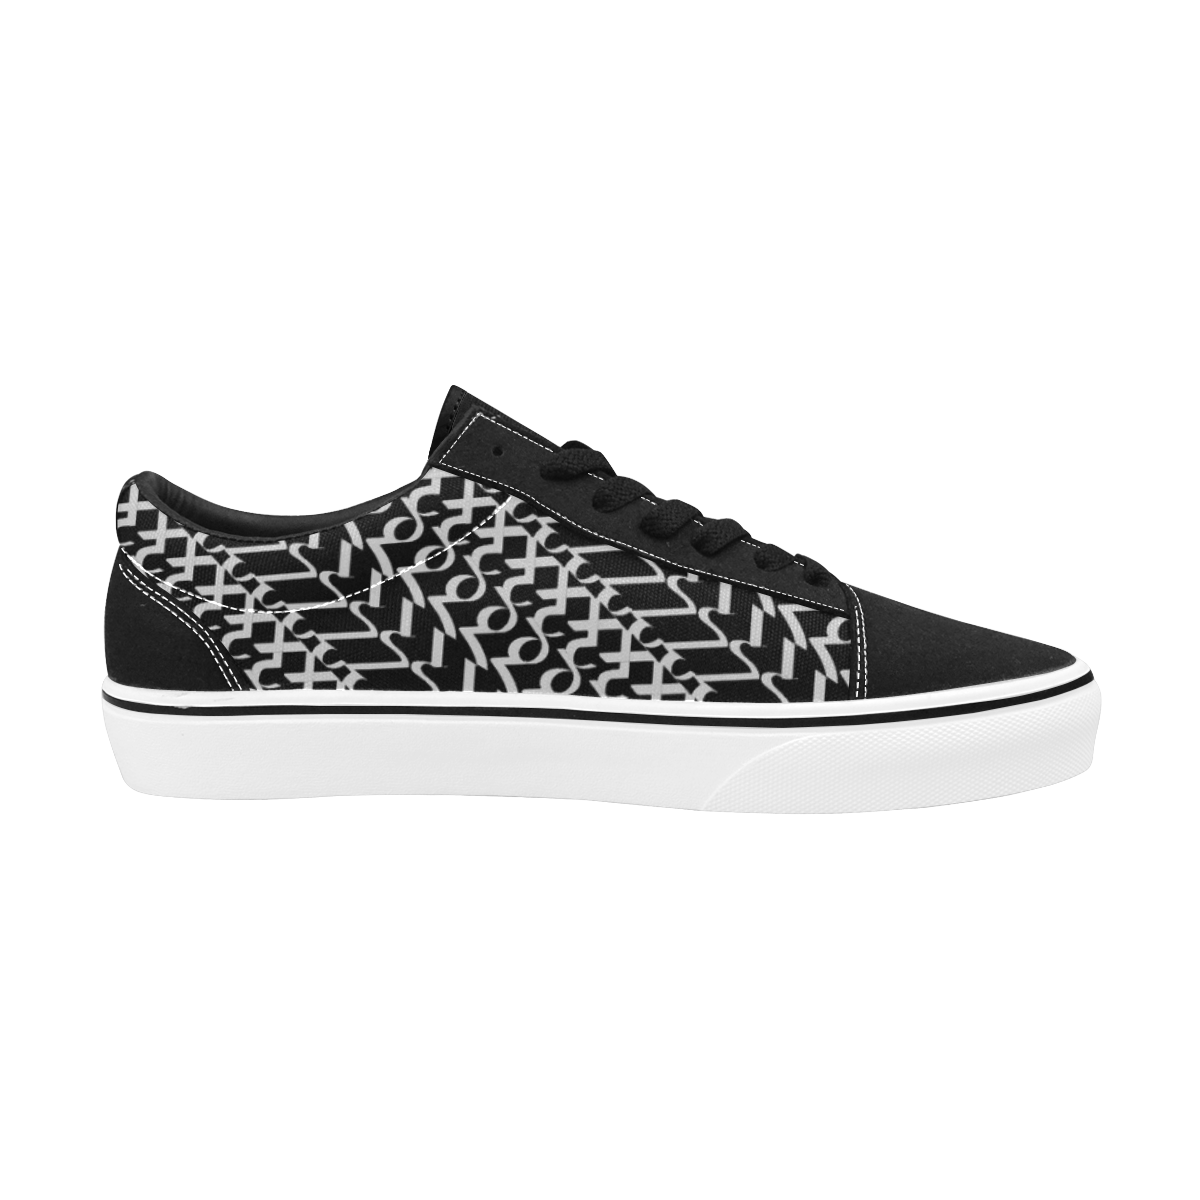 NUMBERS Collection 1234567 Black/White Men's Low Top Skateboarding Shoes (Model E001-2)